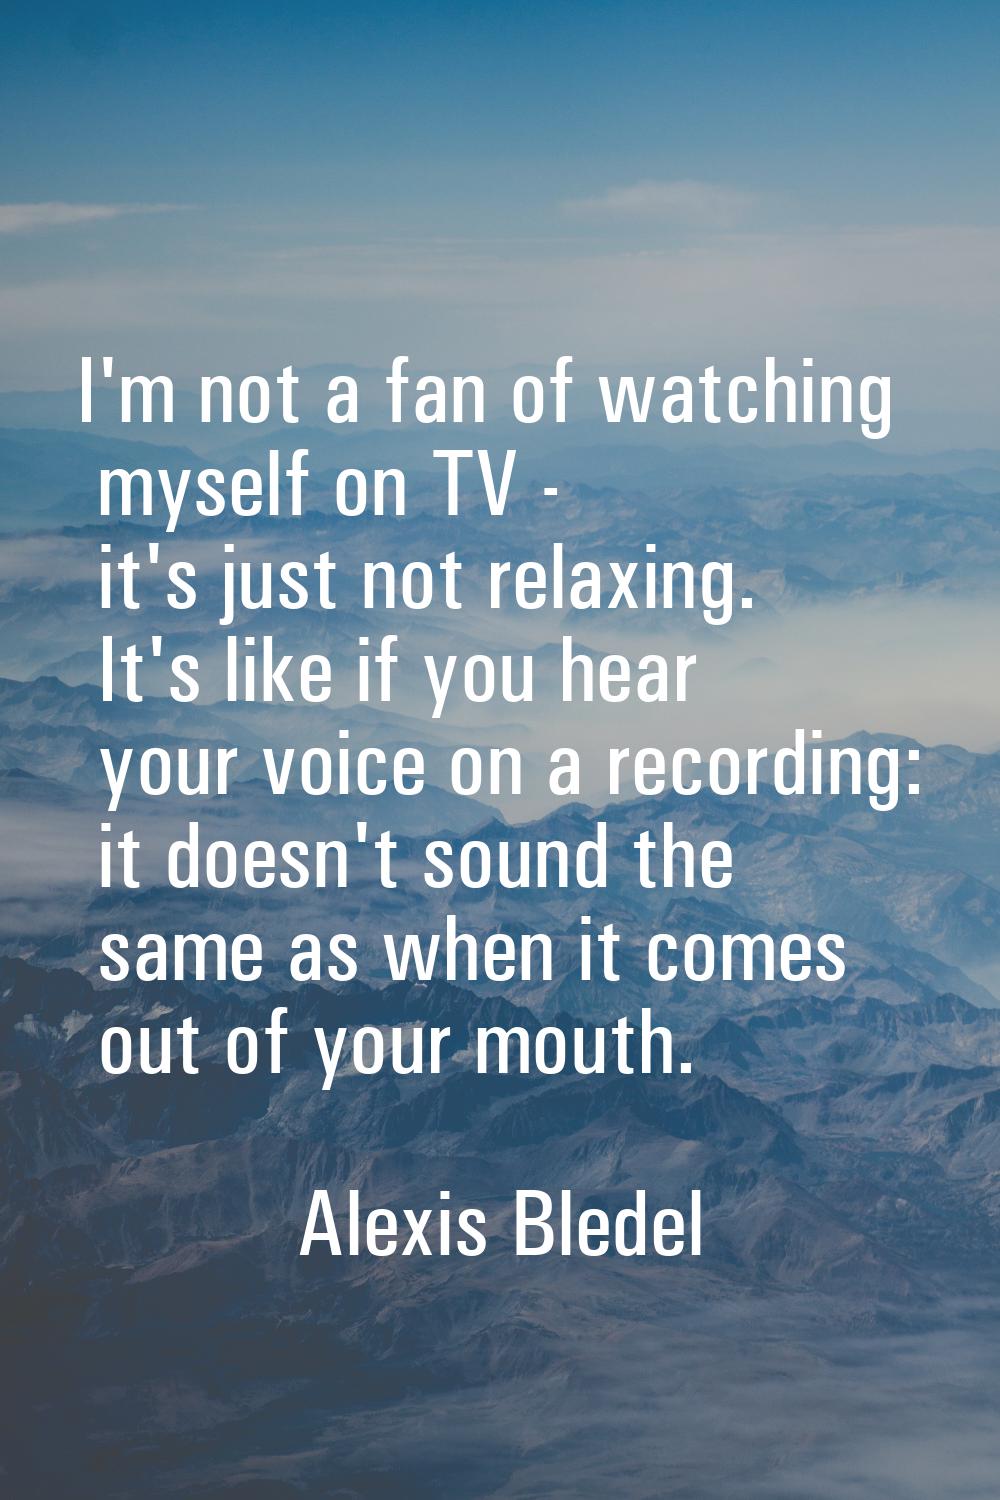 I'm not a fan of watching myself on TV - it's just not relaxing. It's like if you hear your voice o